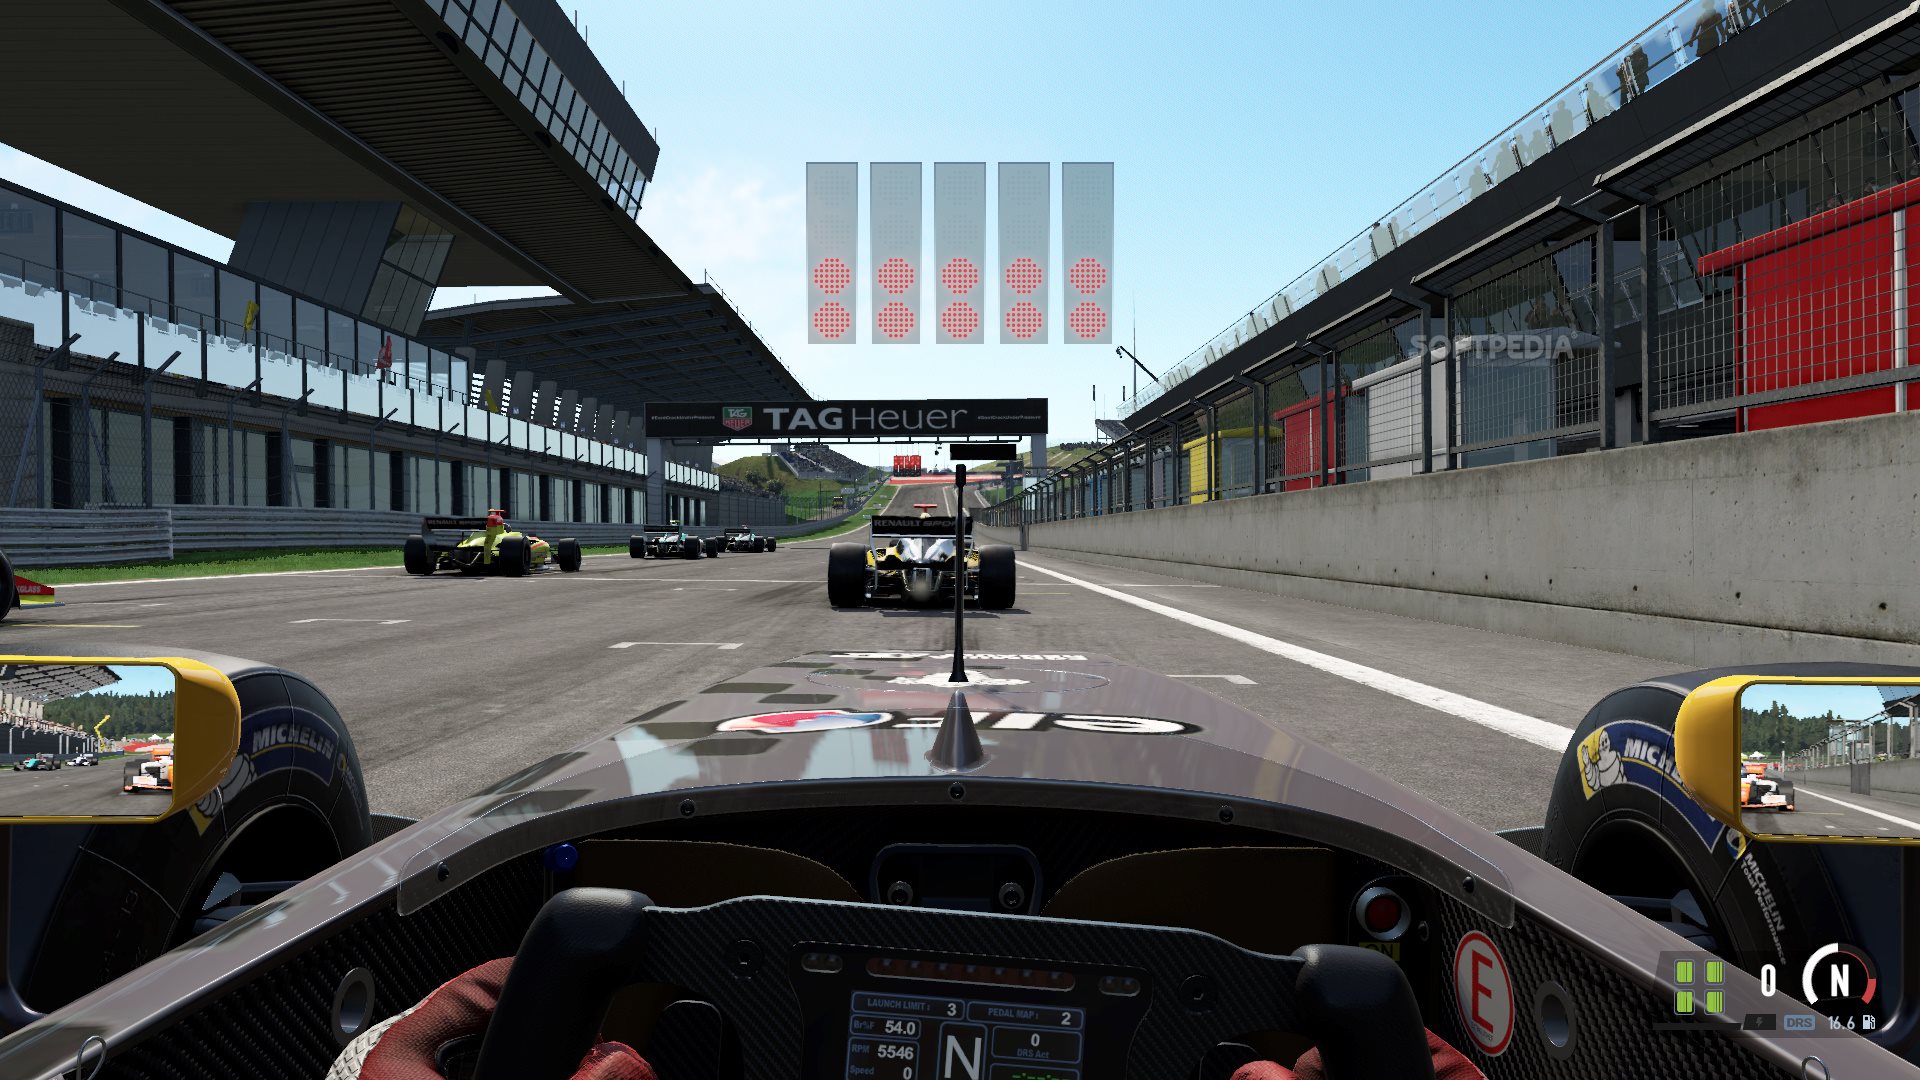 free download project cars